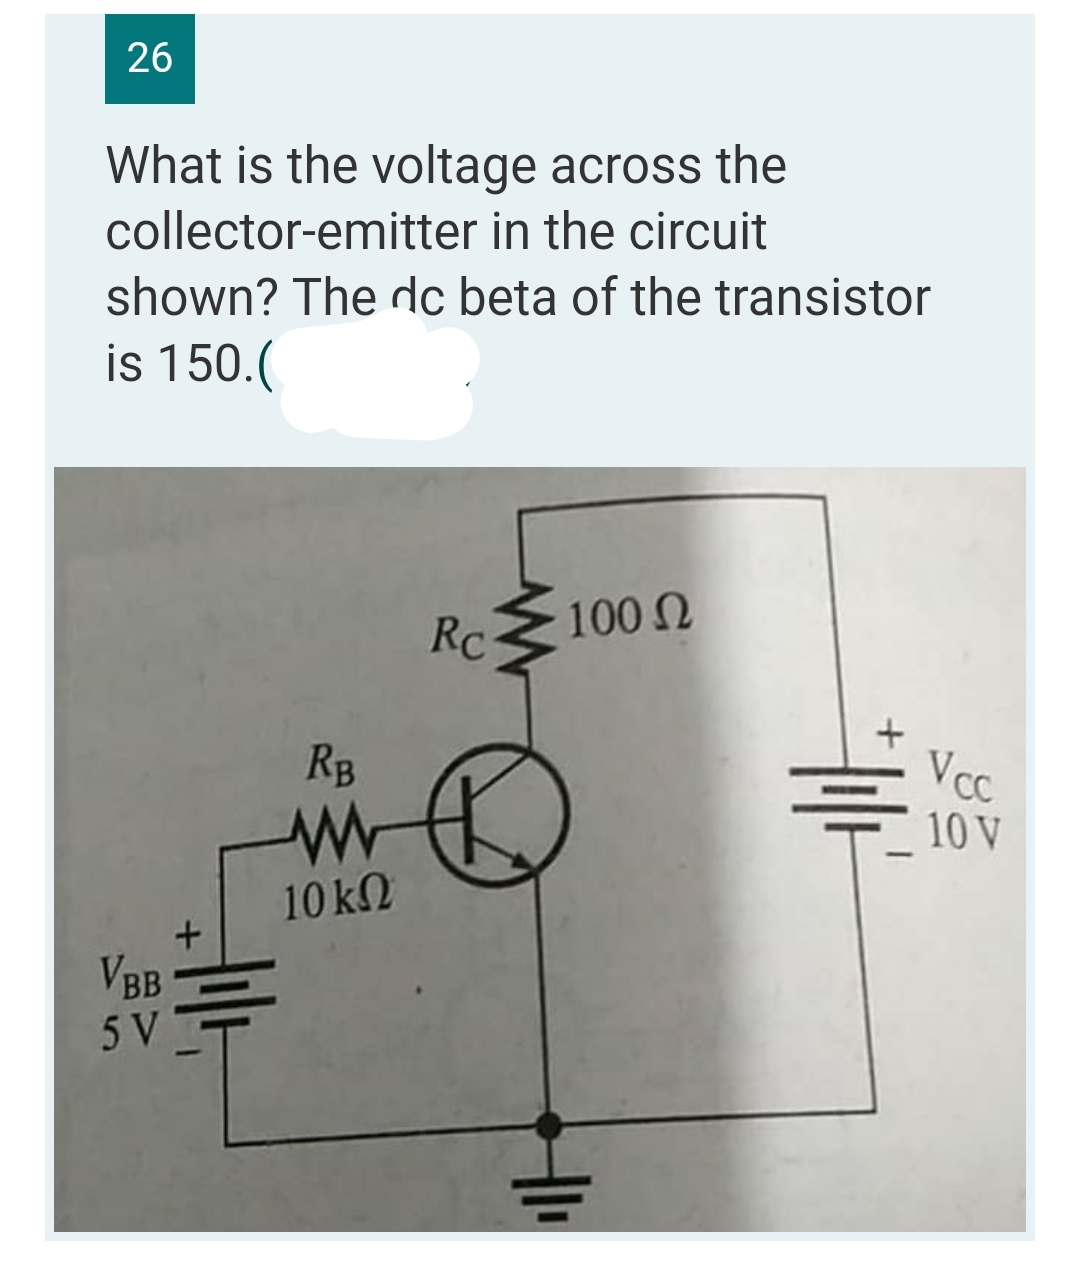 26
What is the voltage across the
collector-emitter in the circuit
shown? The dc beta of the transistor
is 150.(
Rc
100 Ω
VBB
5 V
+
414
RB
www
10 ΚΩ
H1₁
#11/1²
Vcc
10 V